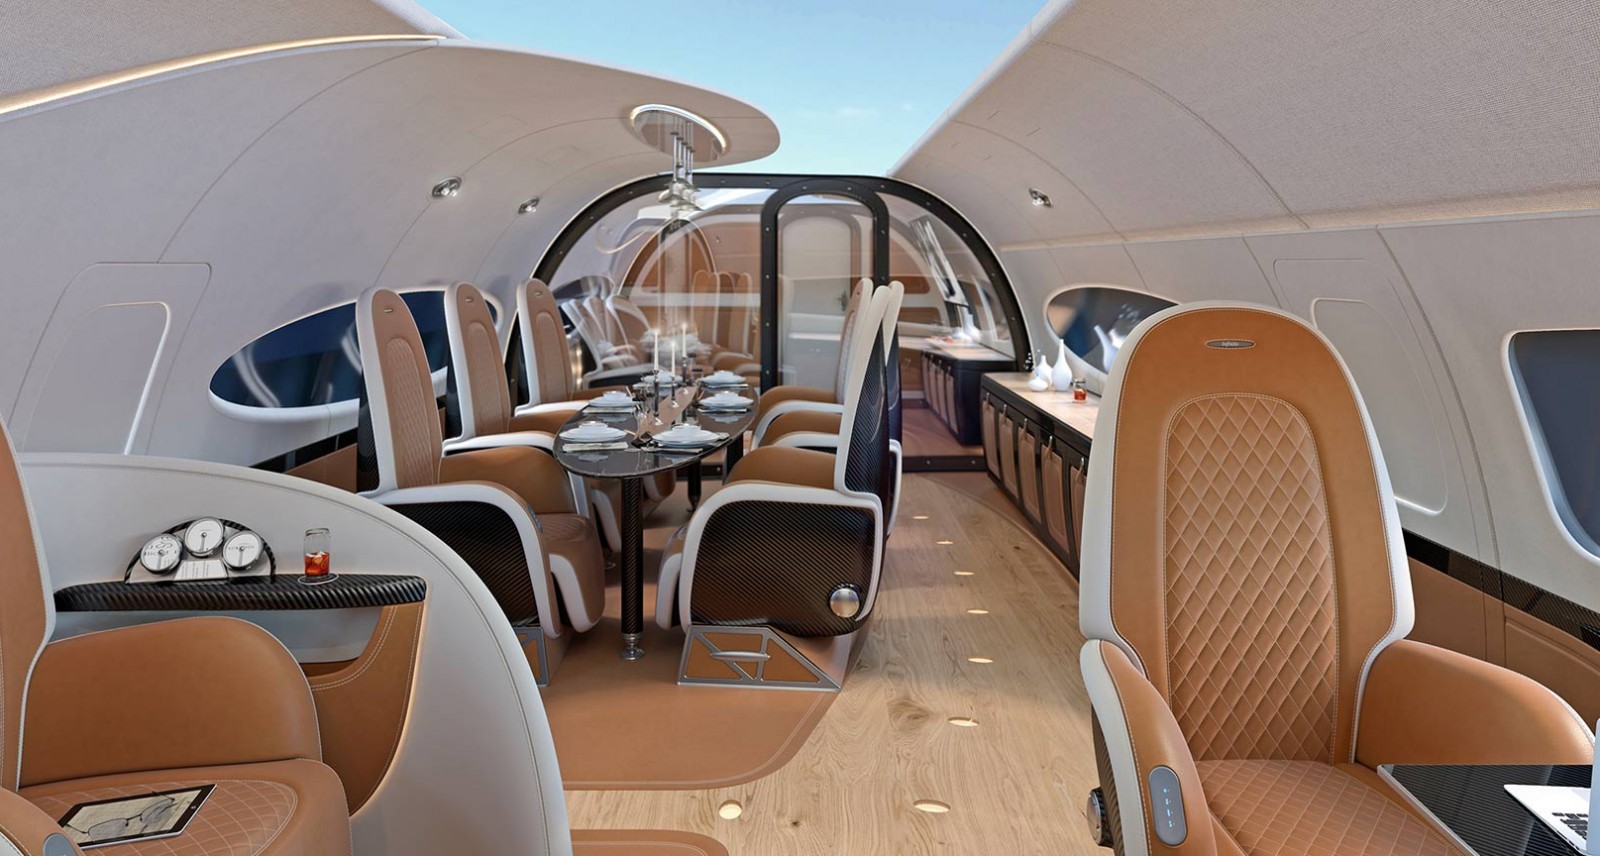 This Pagani x Airbus Jet Cabin Feels Like a Supercar for the Sky